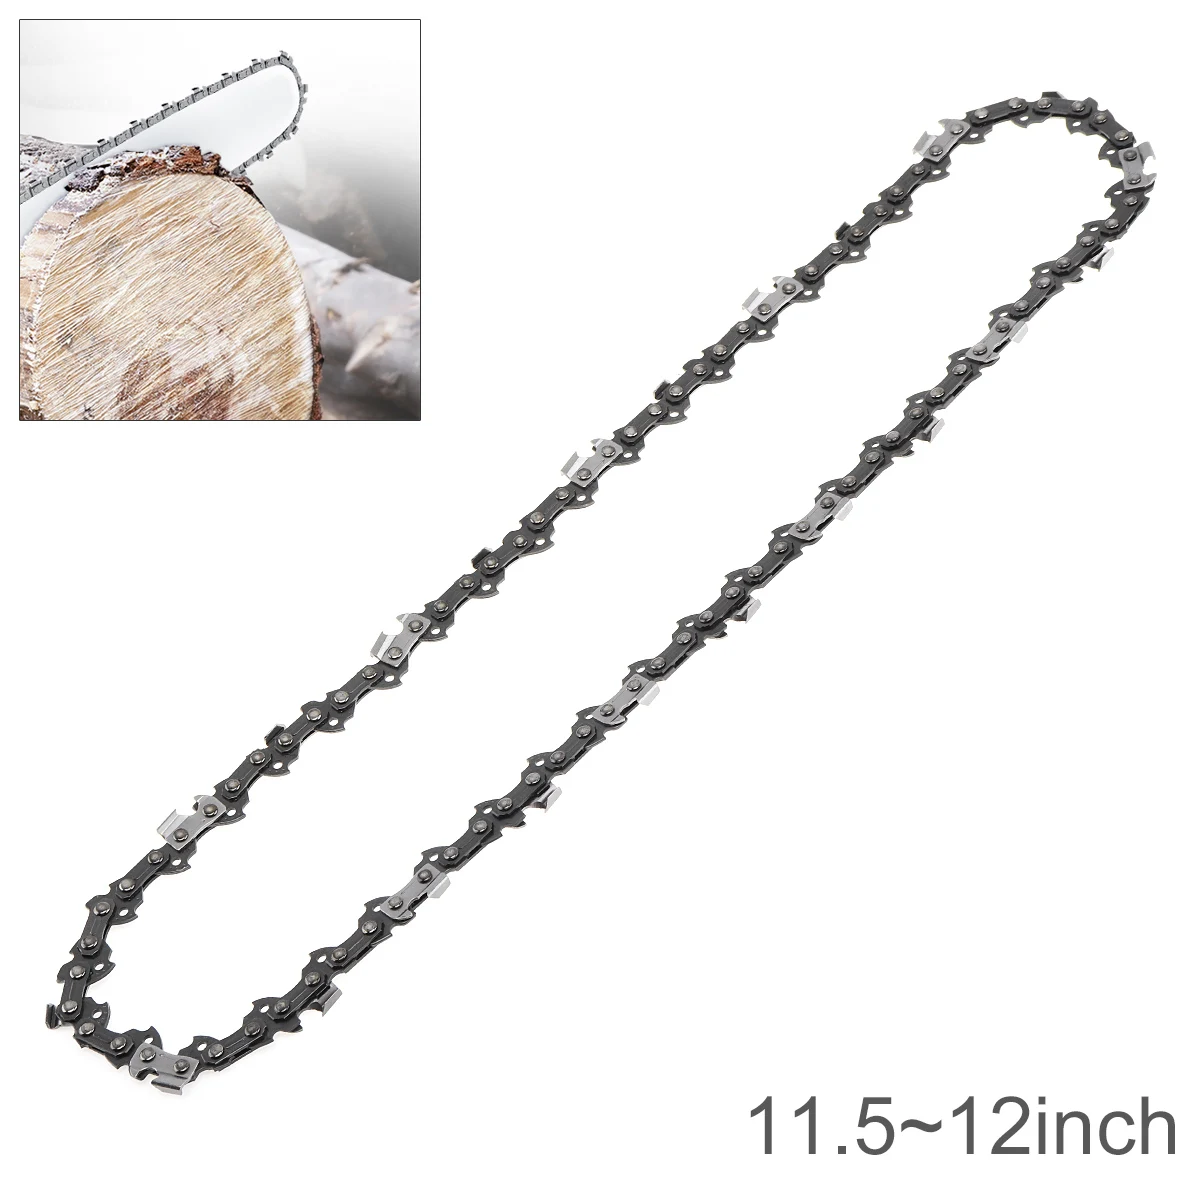 11.5-12'' Chainsaw Chain Blade Wood Cutting Chainsaw Parts 50-52 Drive 3/8 Pitch Chainsaw Saw Mill Chain Tool Accessories 14 chainsaw chain wood cutting chainsaw parts 52 drive links 3 8 pitch chainsaw saw mill chain